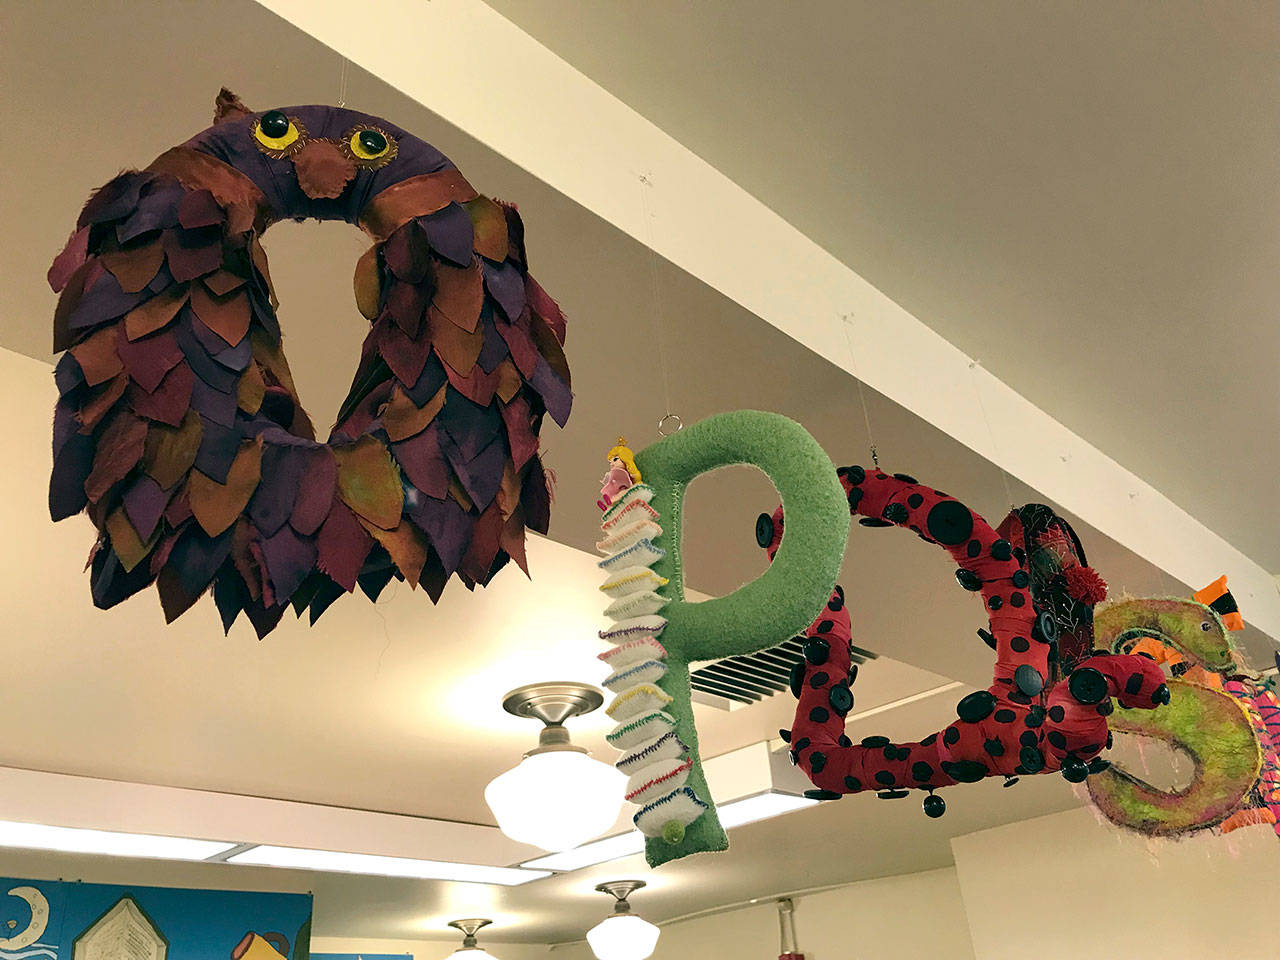 The “A to Z” art show is now a permanent fixture of the children’s room at the Port Townsend Library. A free opening reception celebrates its arrival tonight. (Port Townsend Library)